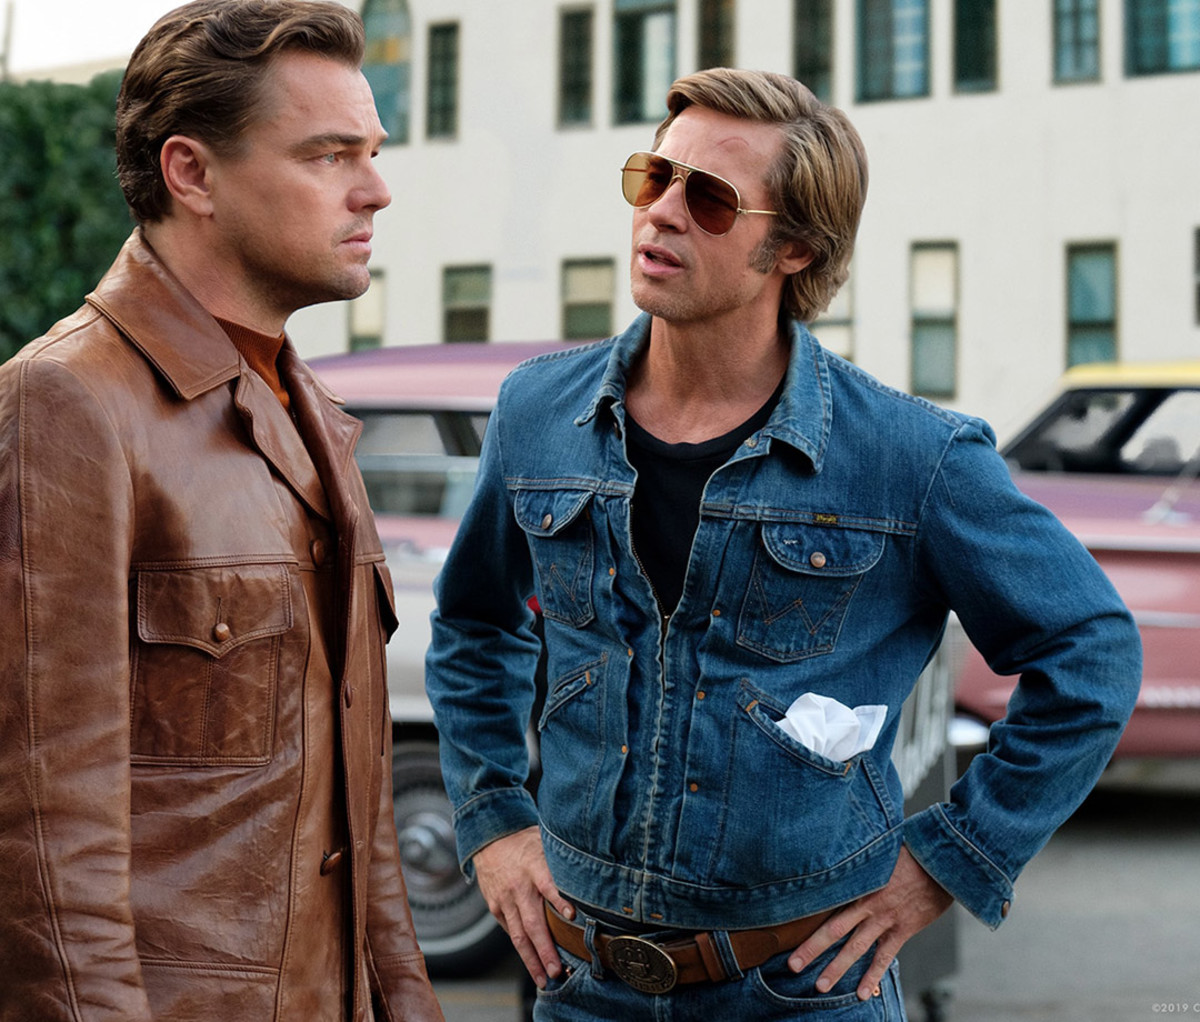 Leonardo DiCaprio and Brad Pitt in "Once Upon a Time ... in Hollywood"